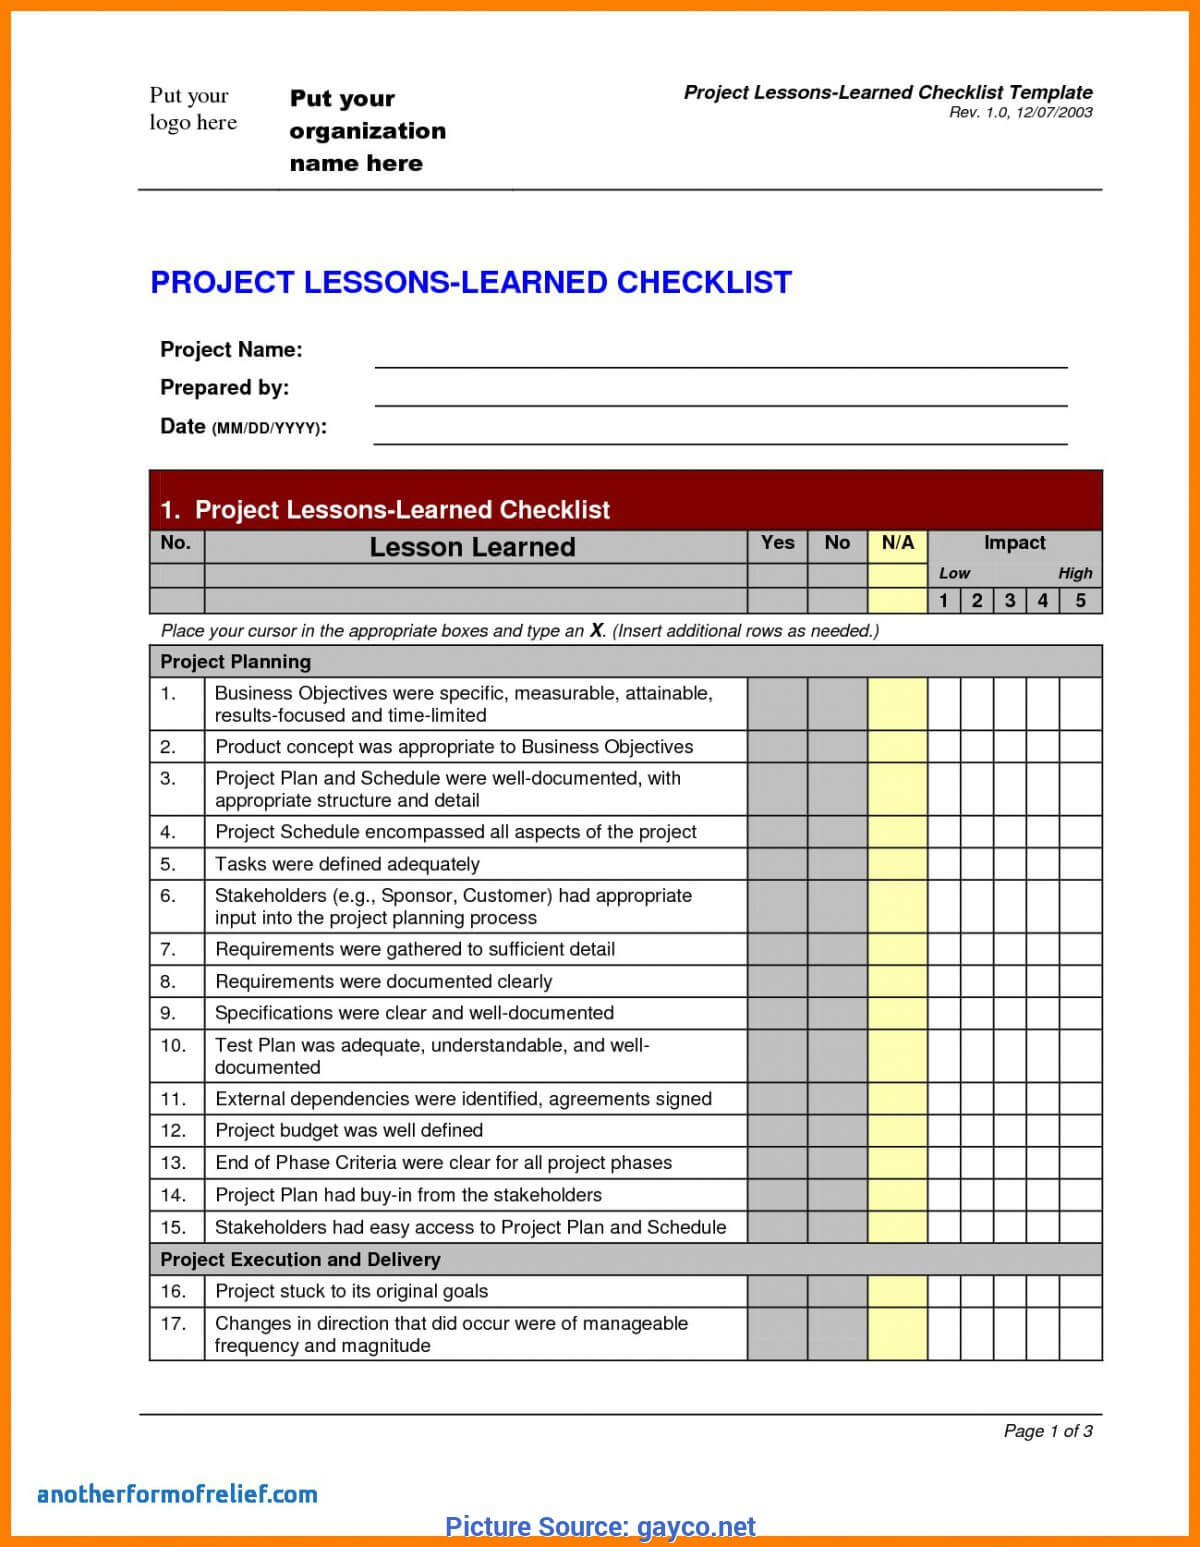 Prince2 Lessons Learned Report Template New 5 Lessons Le Pertaining To Prince2 Lessons Learned Report Template